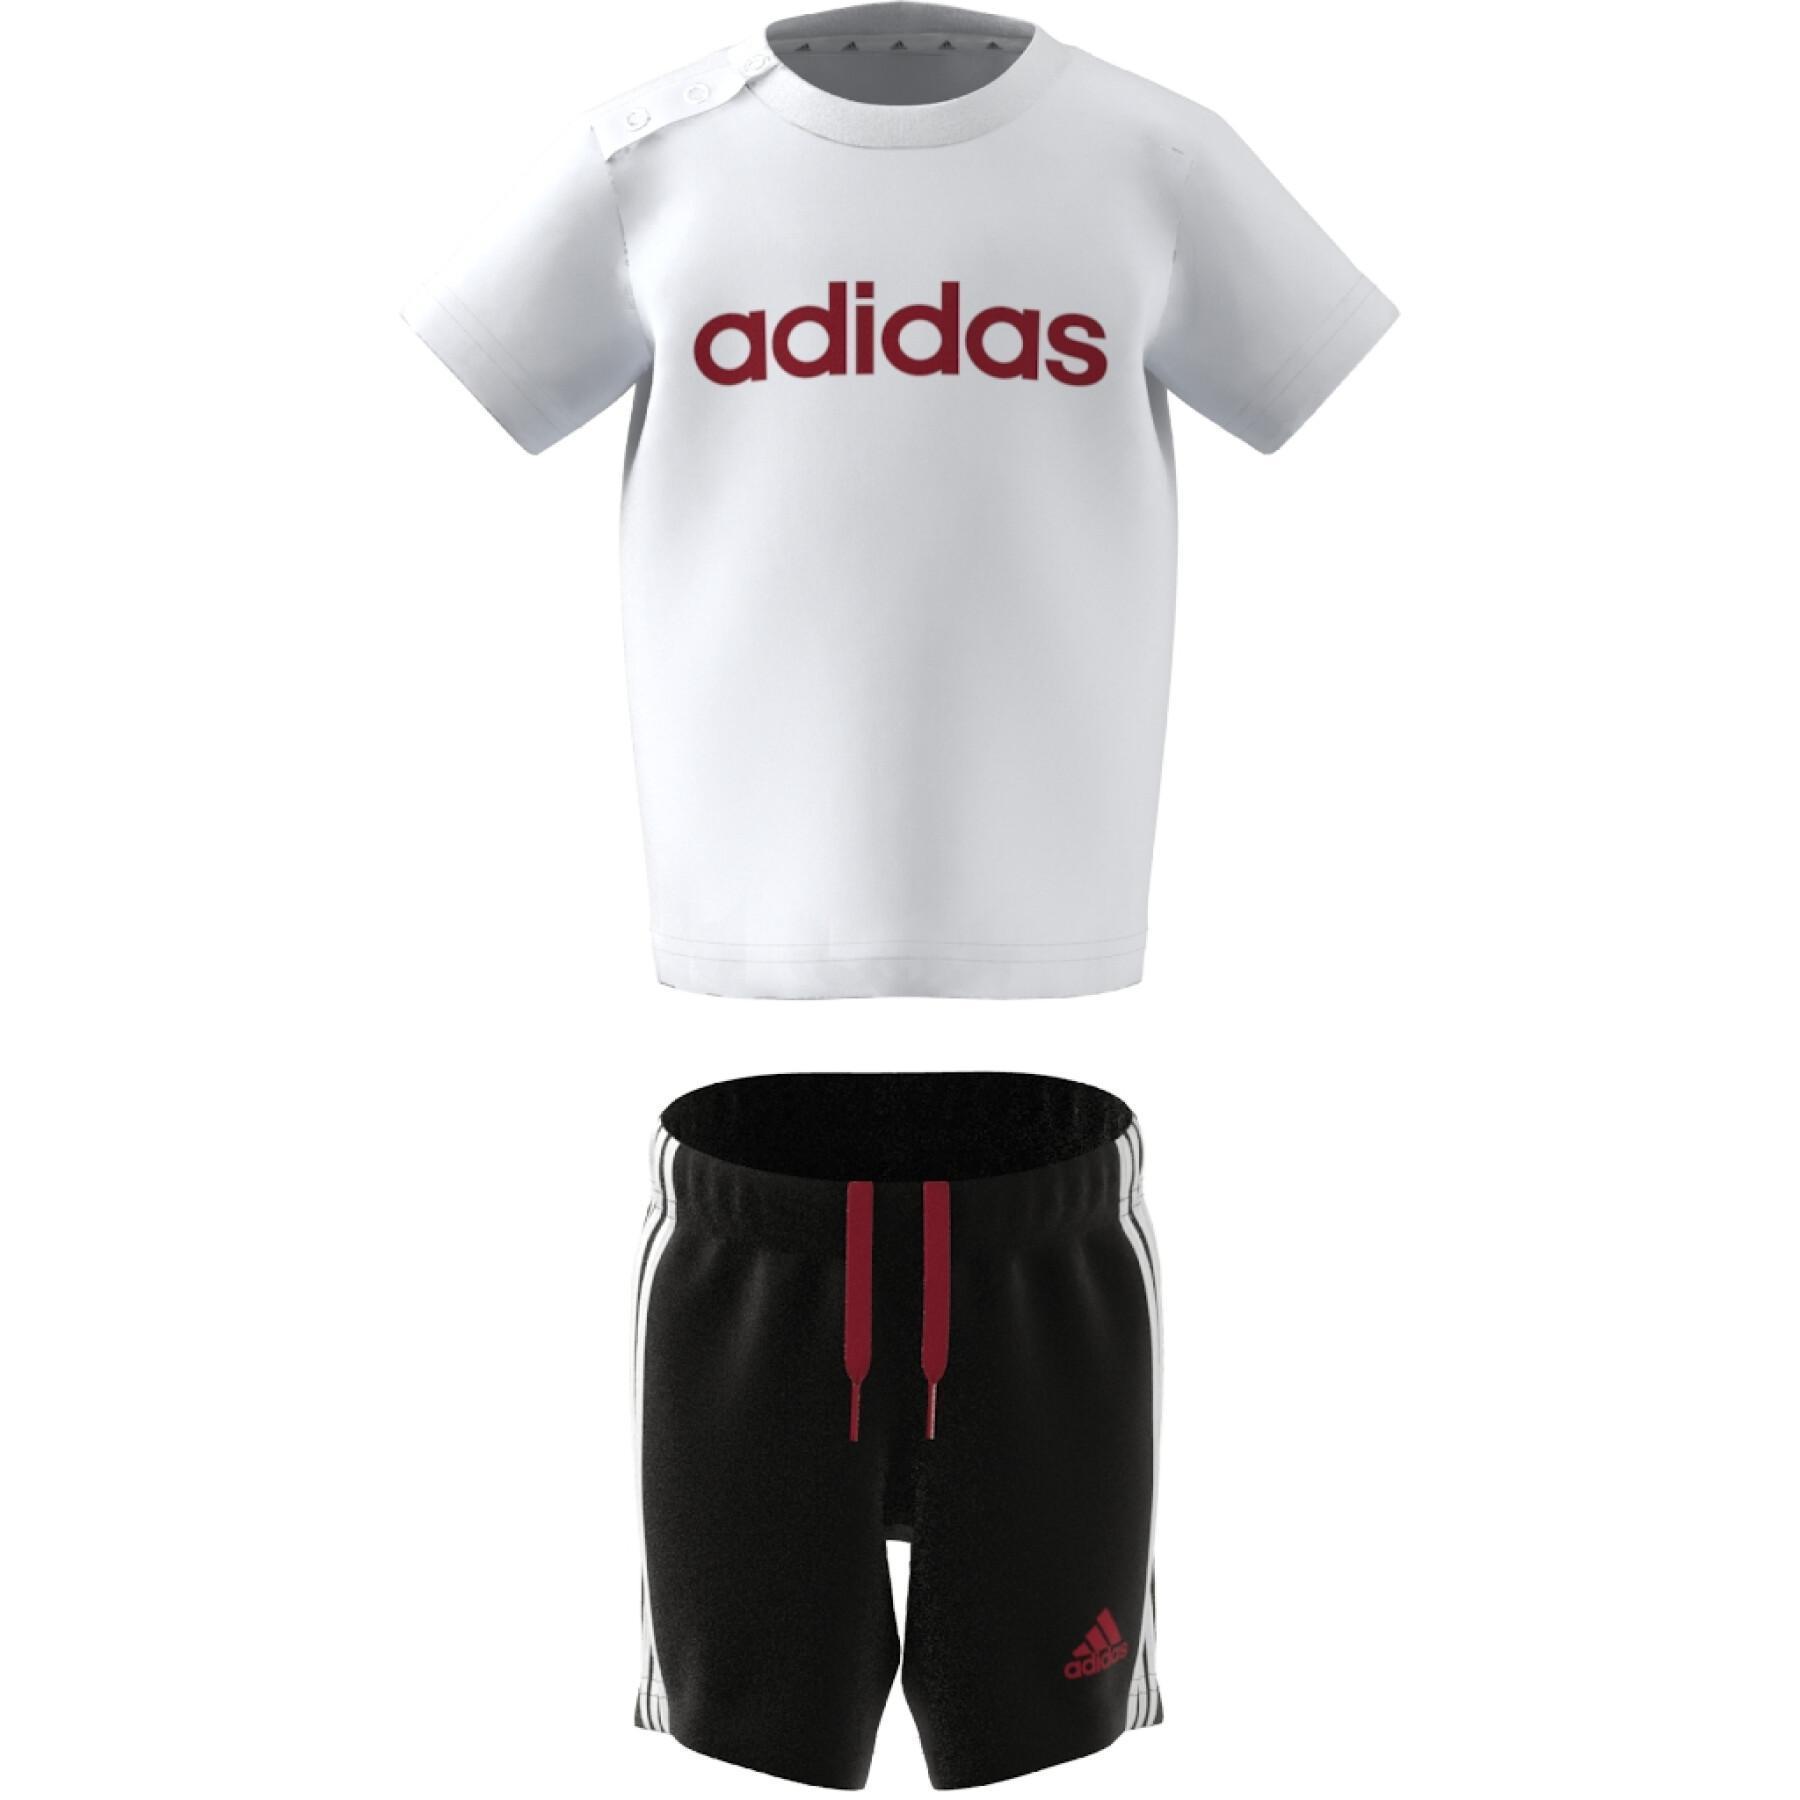 Brands - t-shirt Lifestyle Essentials Organic and 3-Stripes shorts adidas - Lineage adidas cotton set -